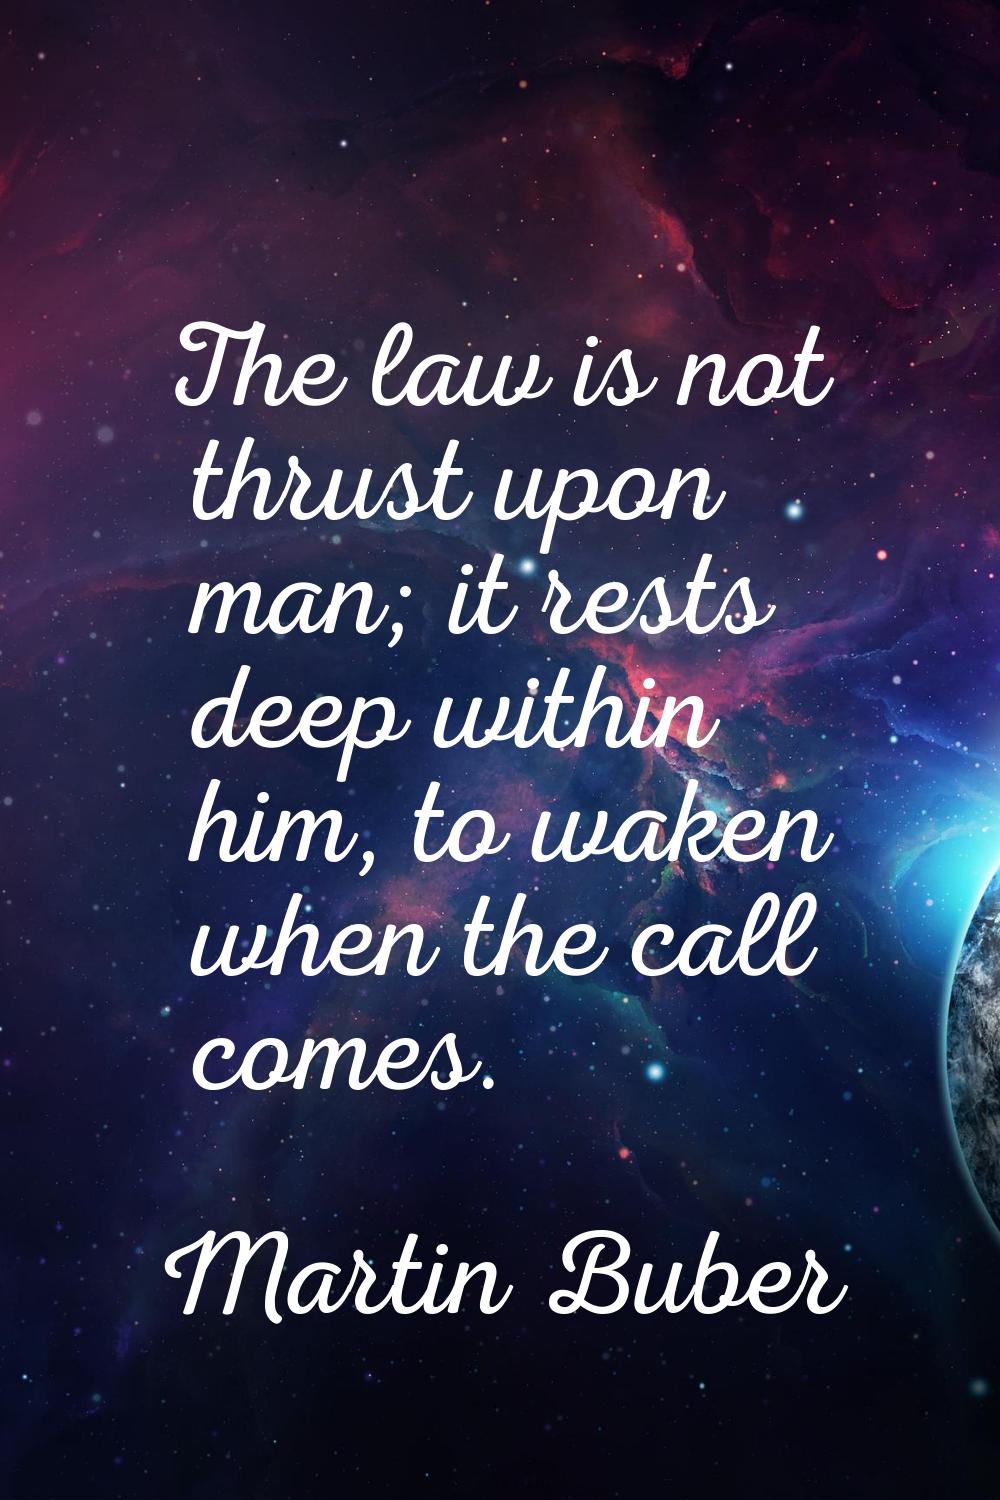 The law is not thrust upon man; it rests deep within him, to waken when the call comes.